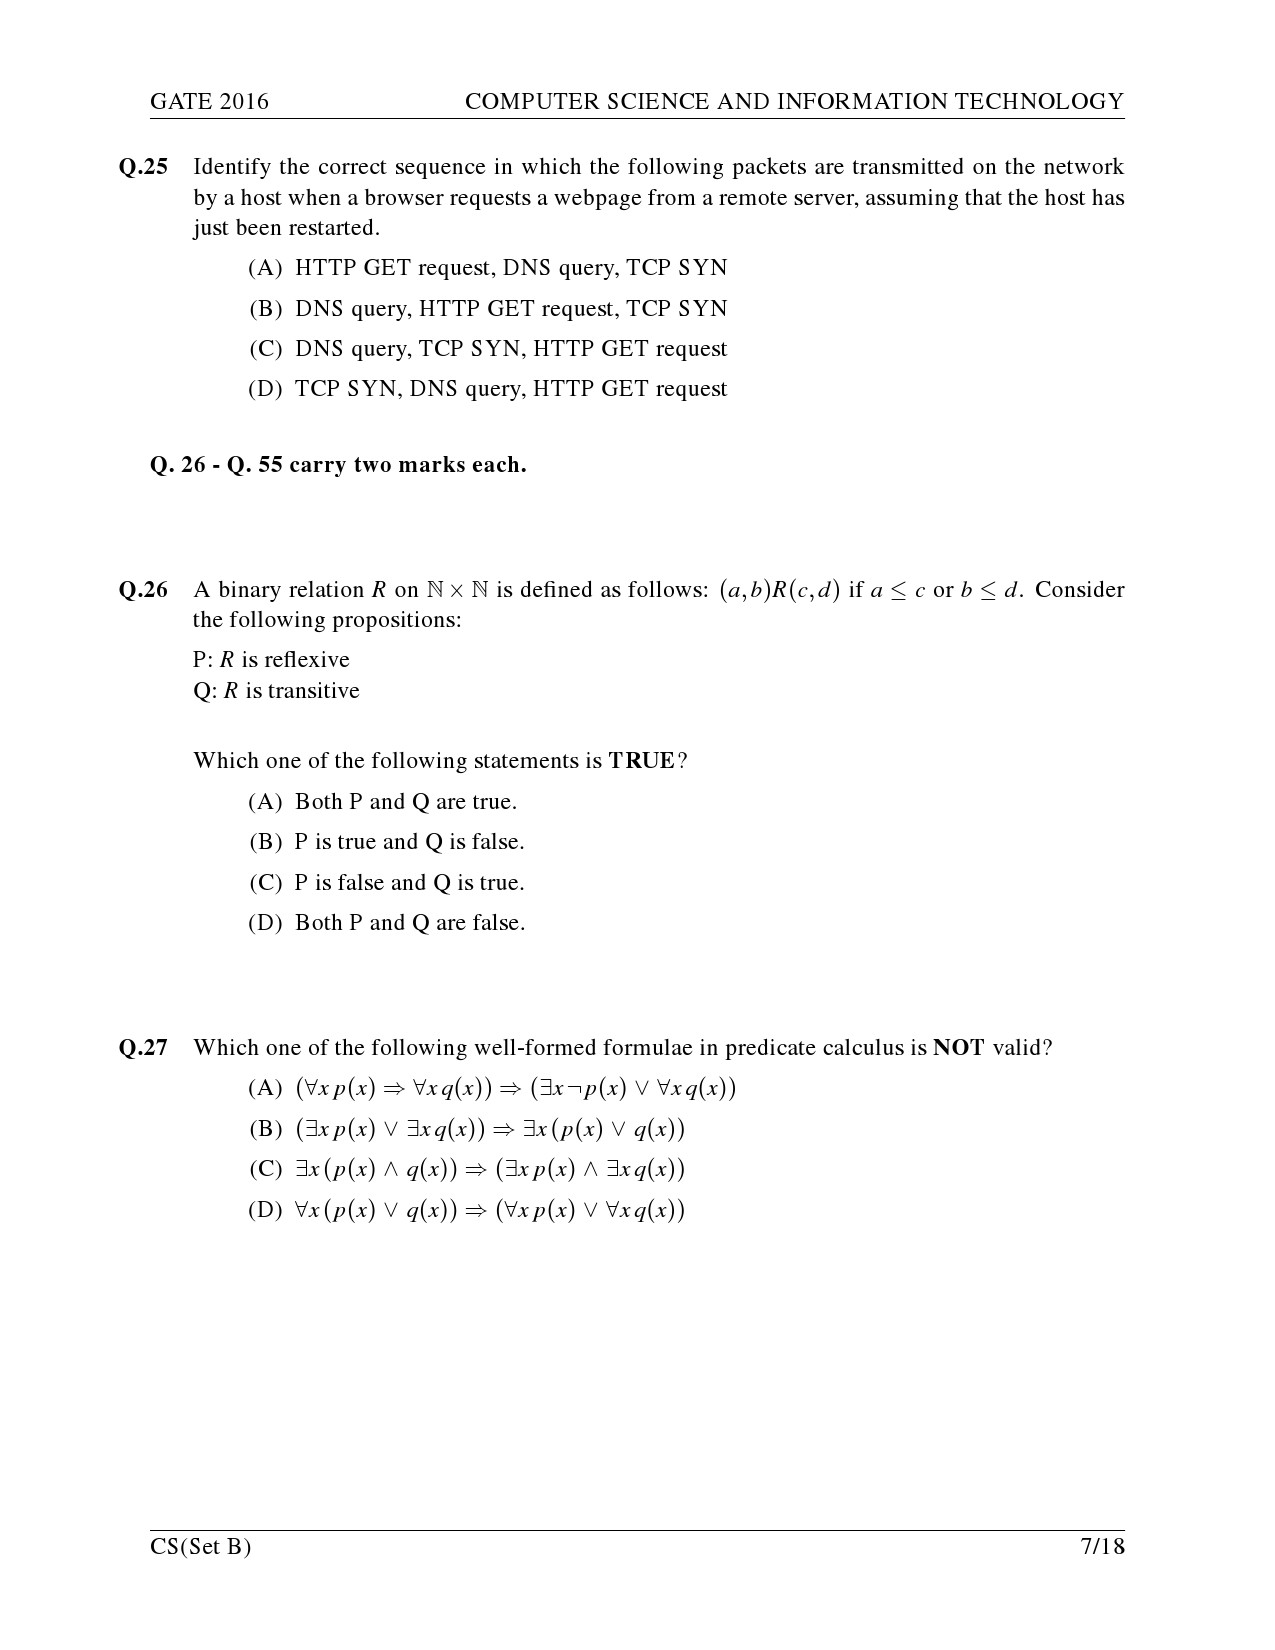 GATE Exam Question Paper 2016 Computer Science and Information Technology Set B 10